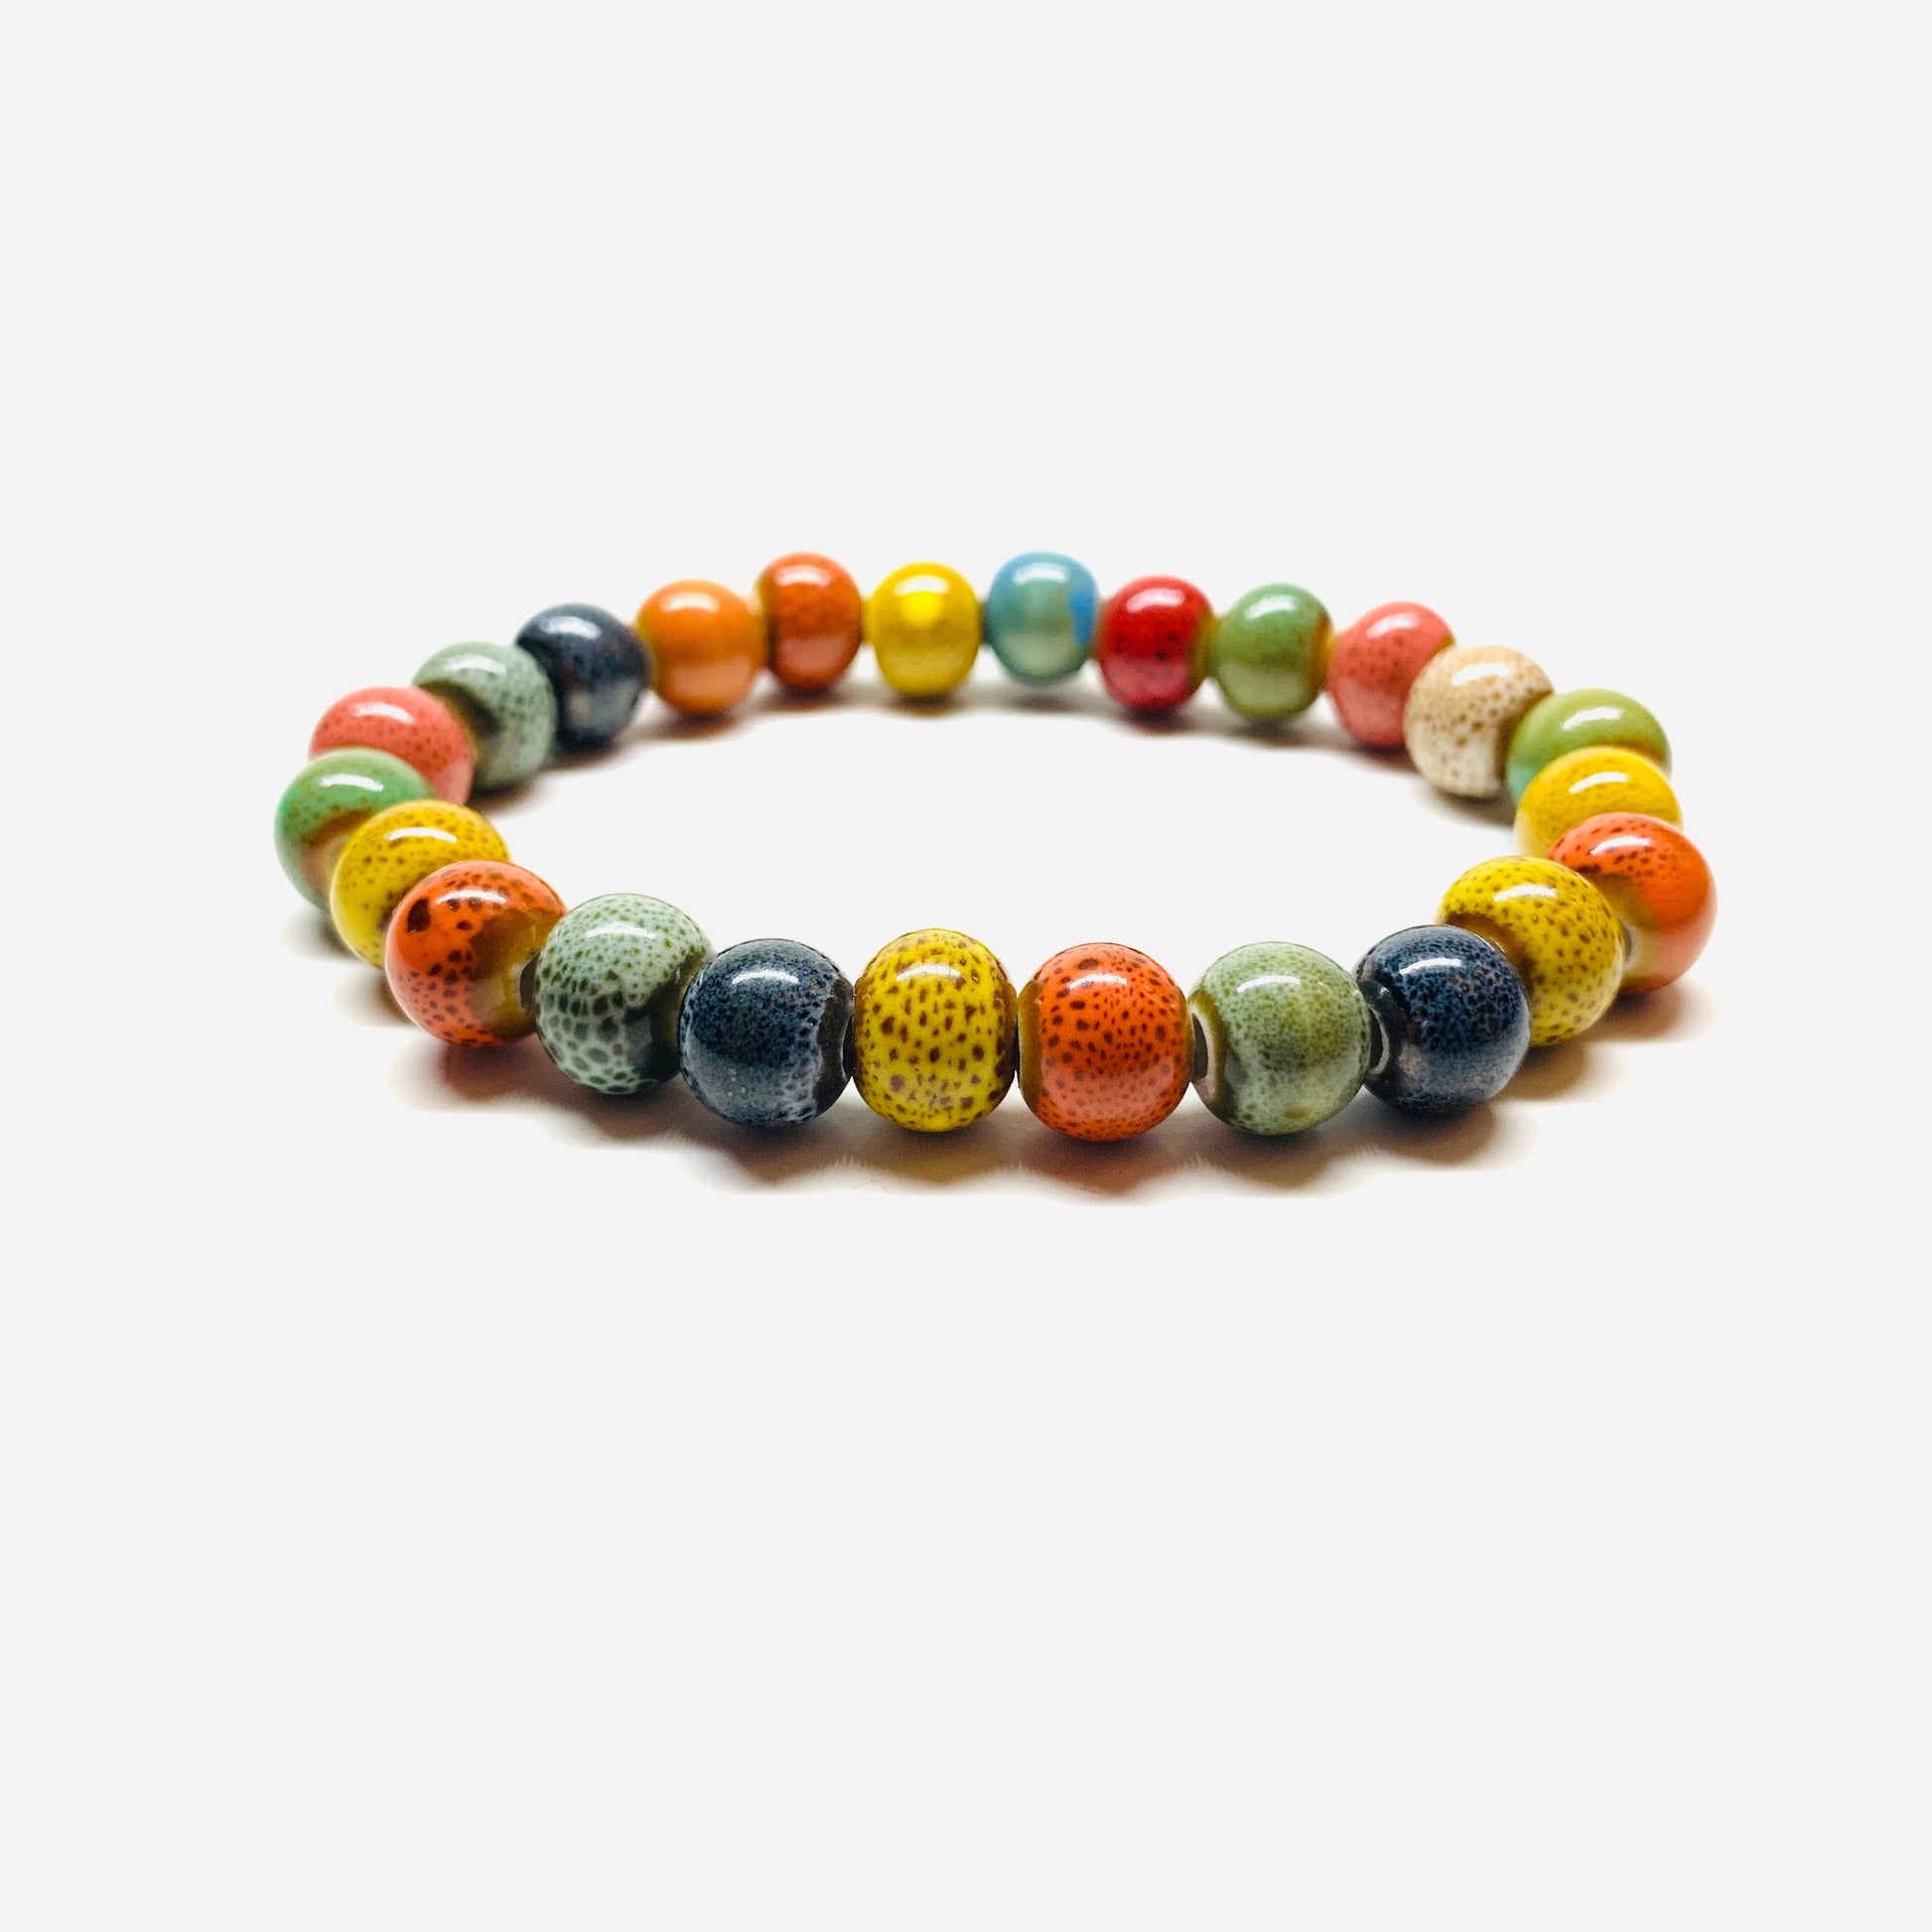 ceramic bracelet made of multicolored beads and designed by Mexican artisans. Unisex clay wristband. Fridamaniacs. Frida Kahlo inspired